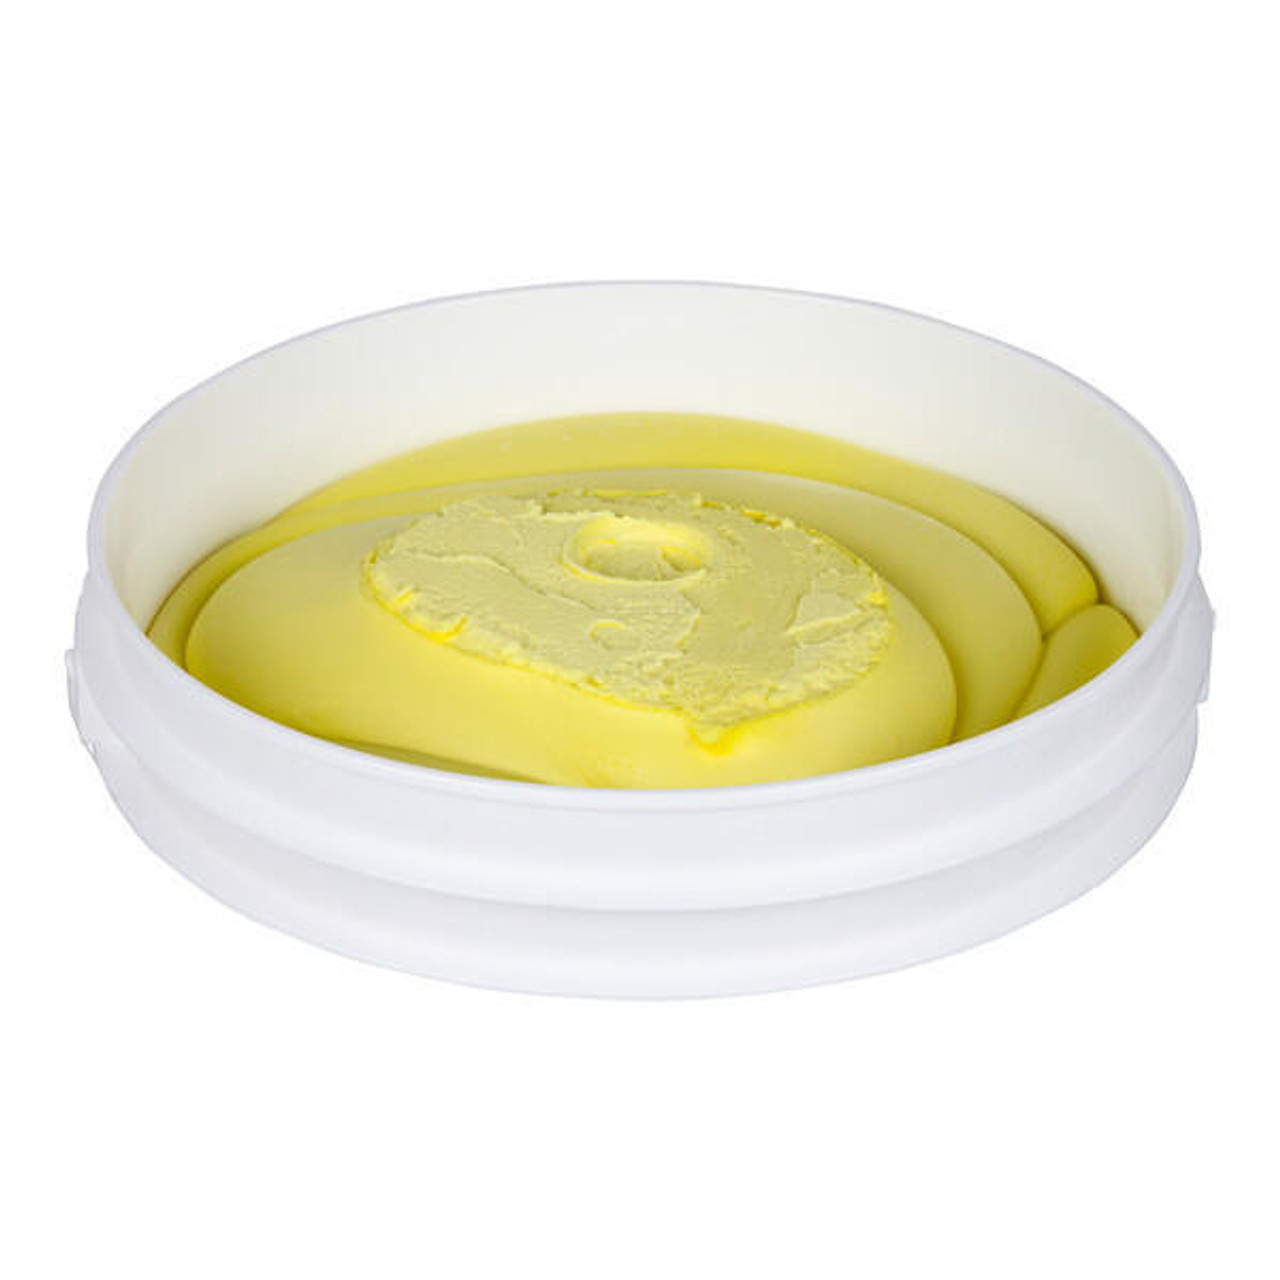  Rich's Allen Pastel Yellow Buttrcreme Icing - 15 lb. Pail Glossy Pastel Yellow 